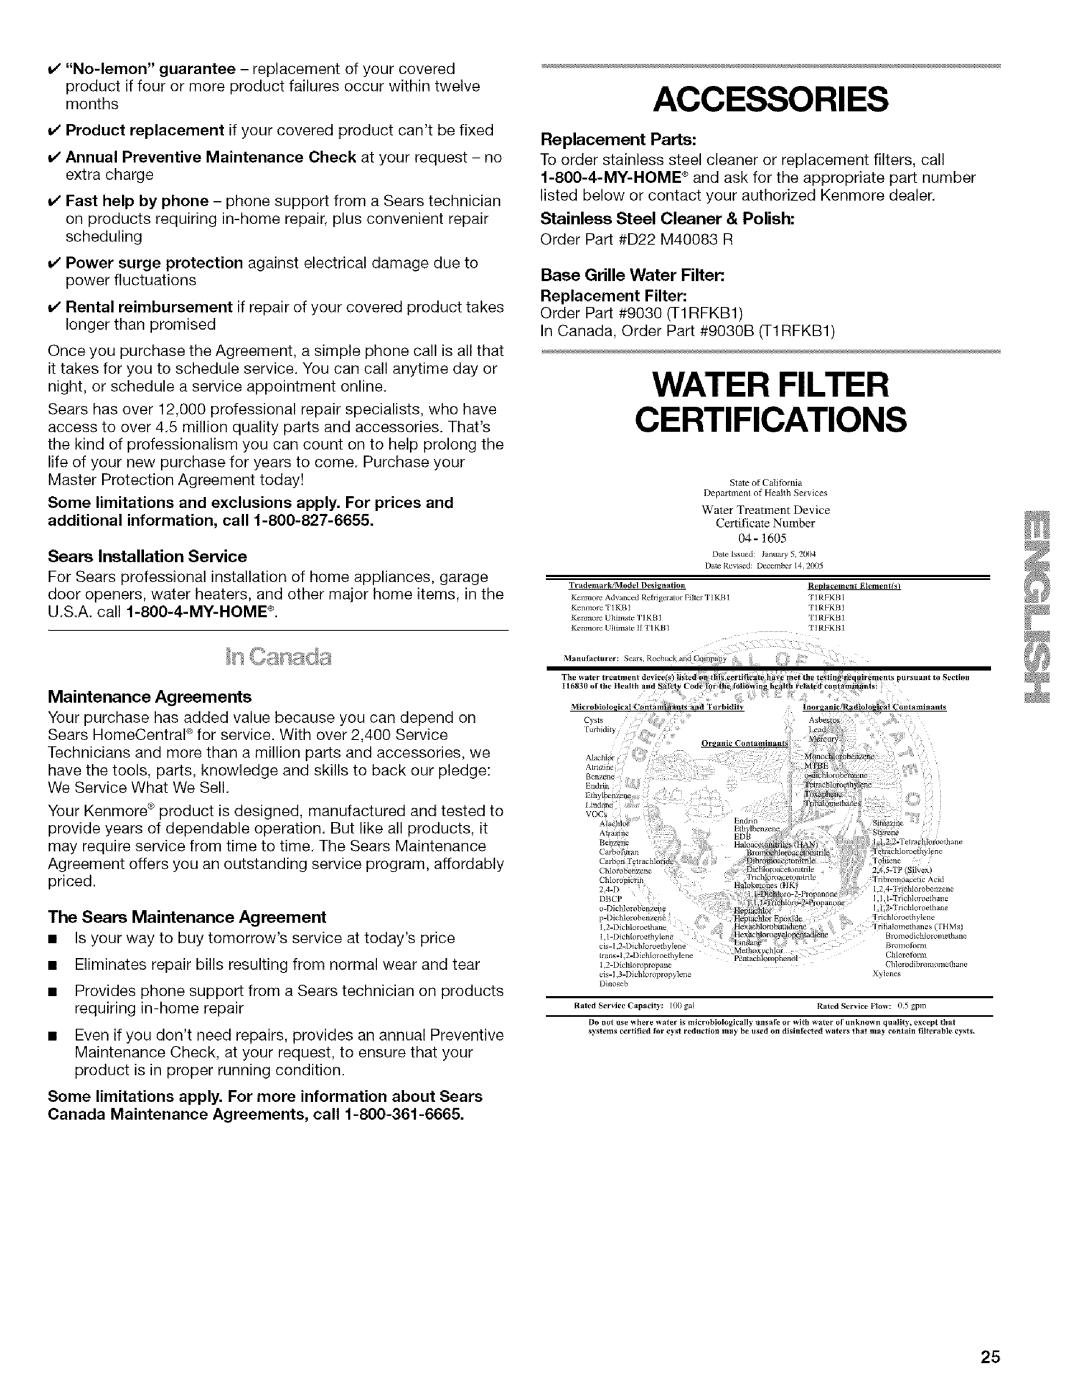 Kenmore 2318589 manual Water Filter, Certifications, Accessories, Sears Installation Service, Maintenance Agreements 